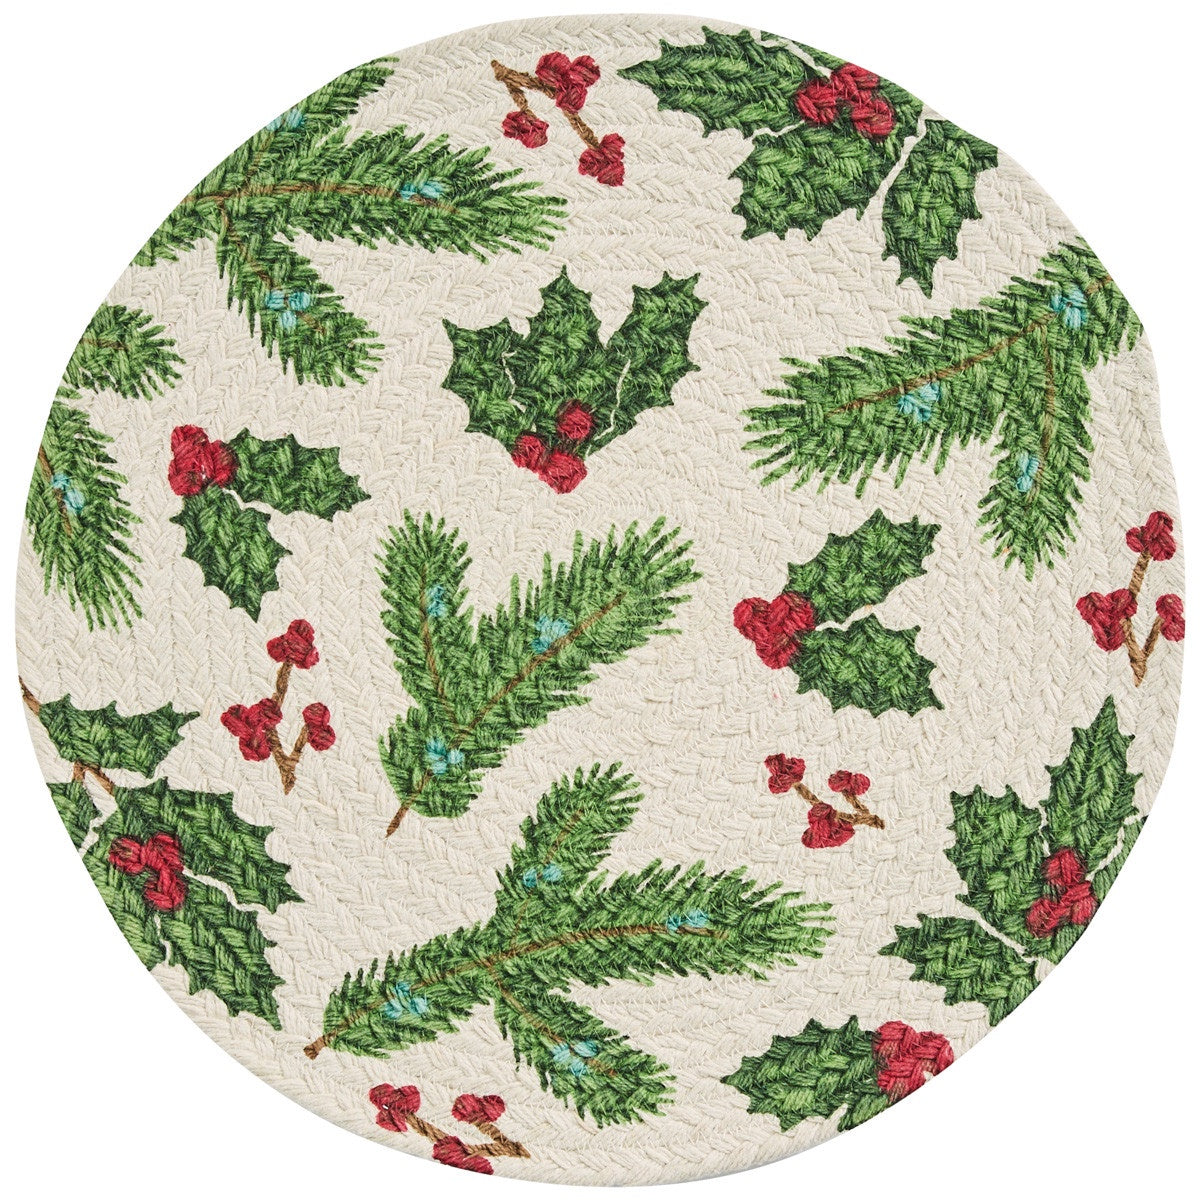 Boughs of Holly Braided Placemat